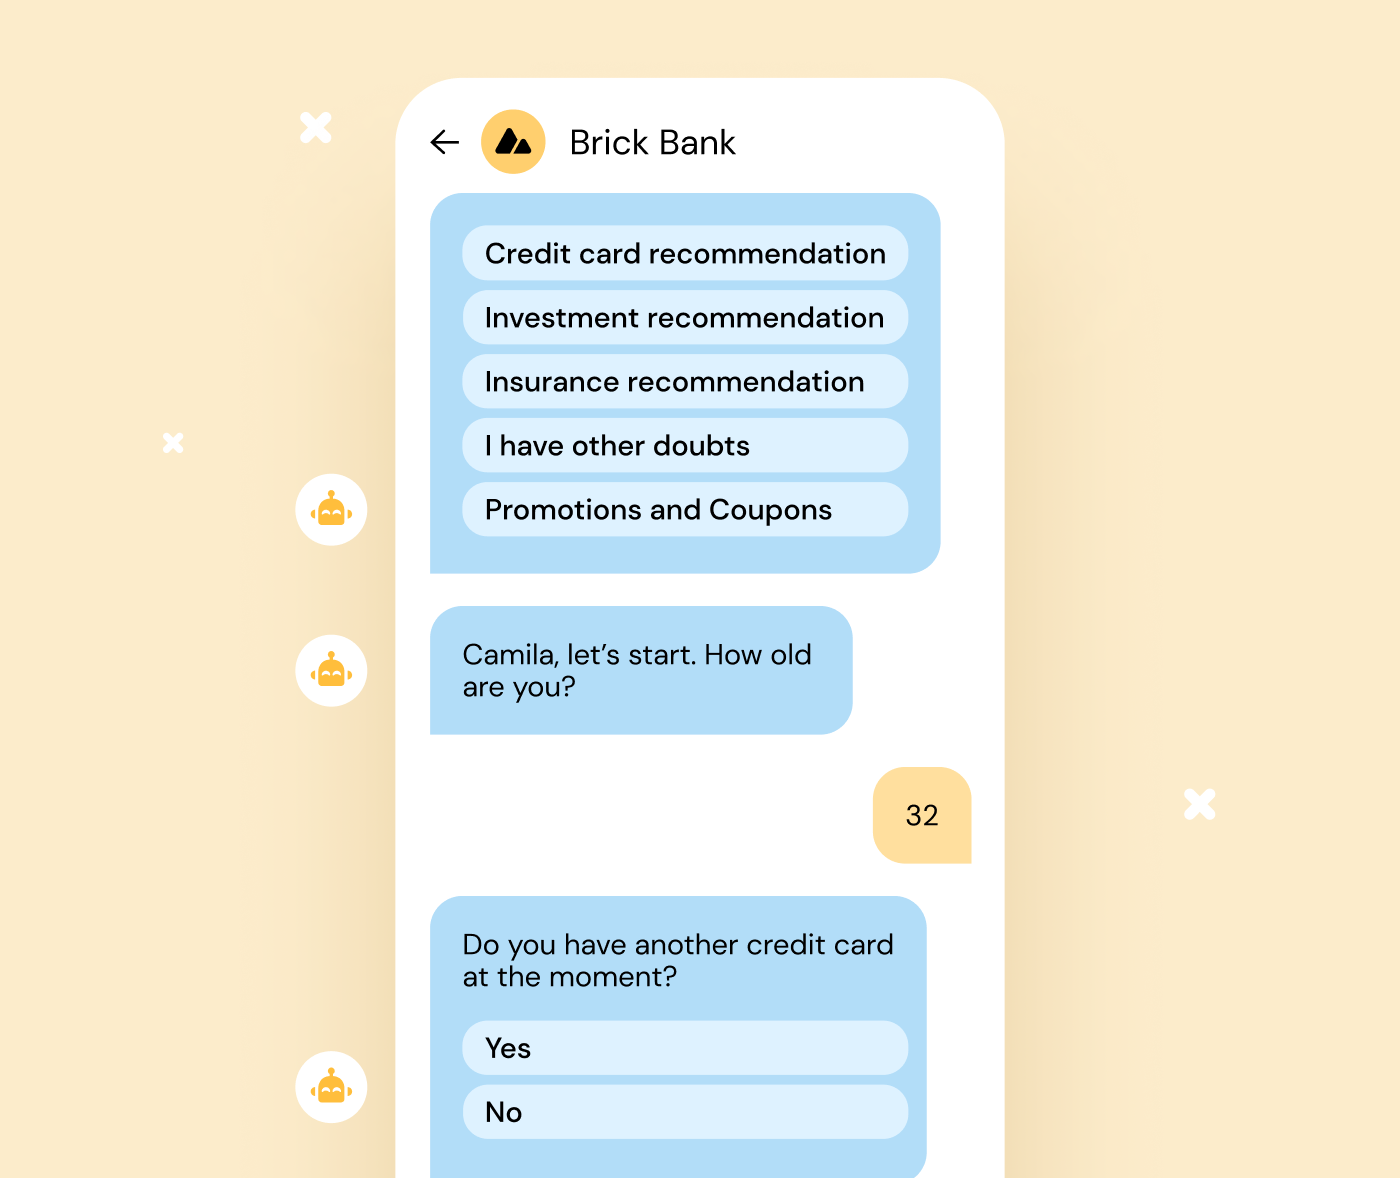 SMS from a bank with personalized recommendations